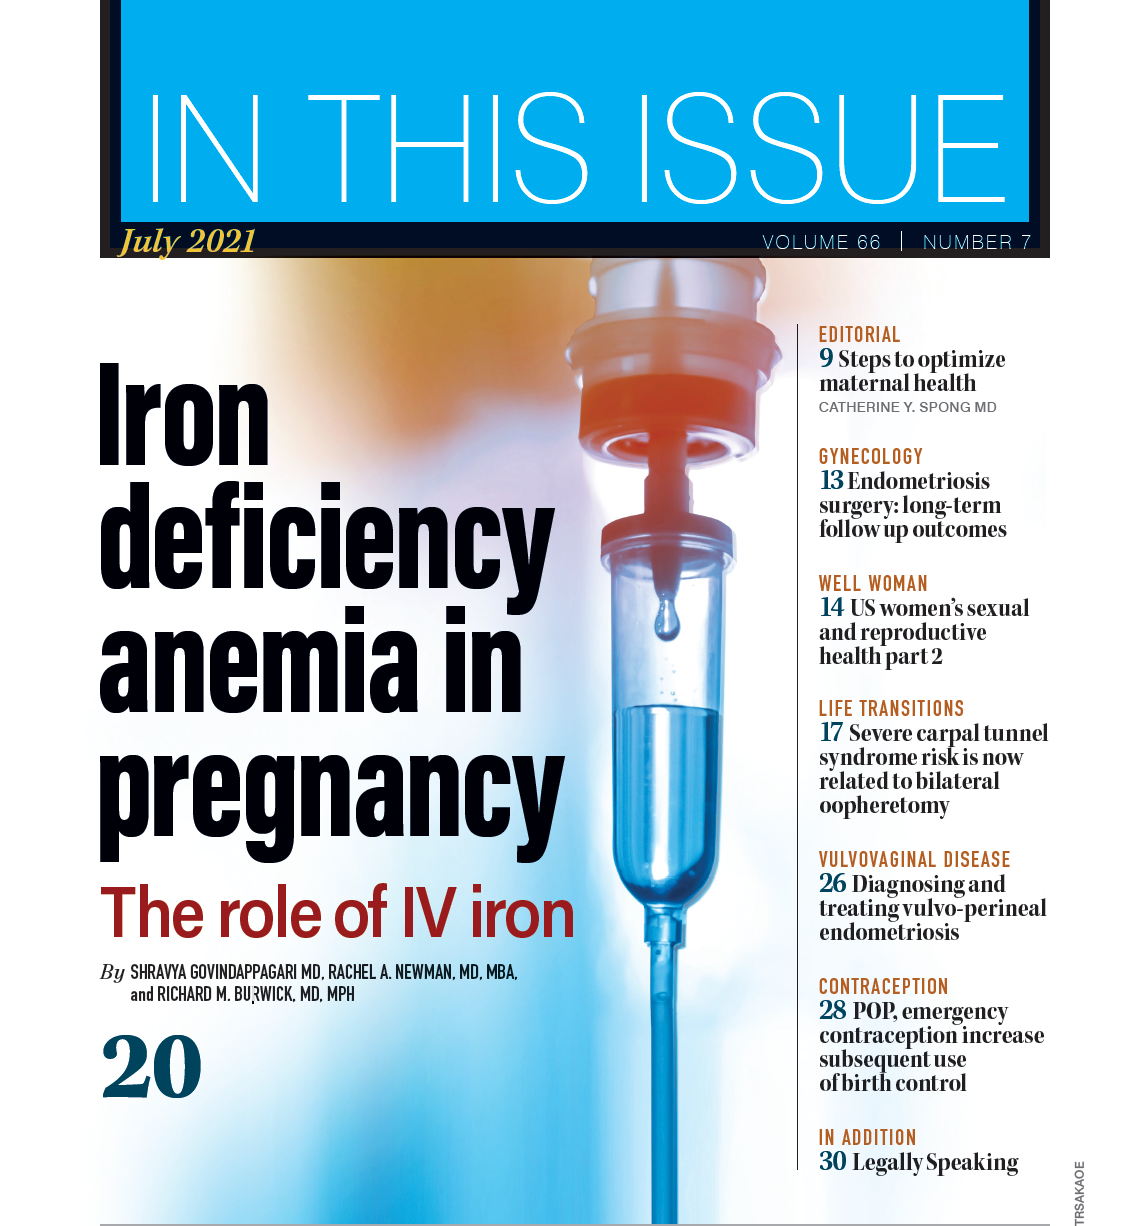 Inside the July issue of Contemporary OB/GYN®